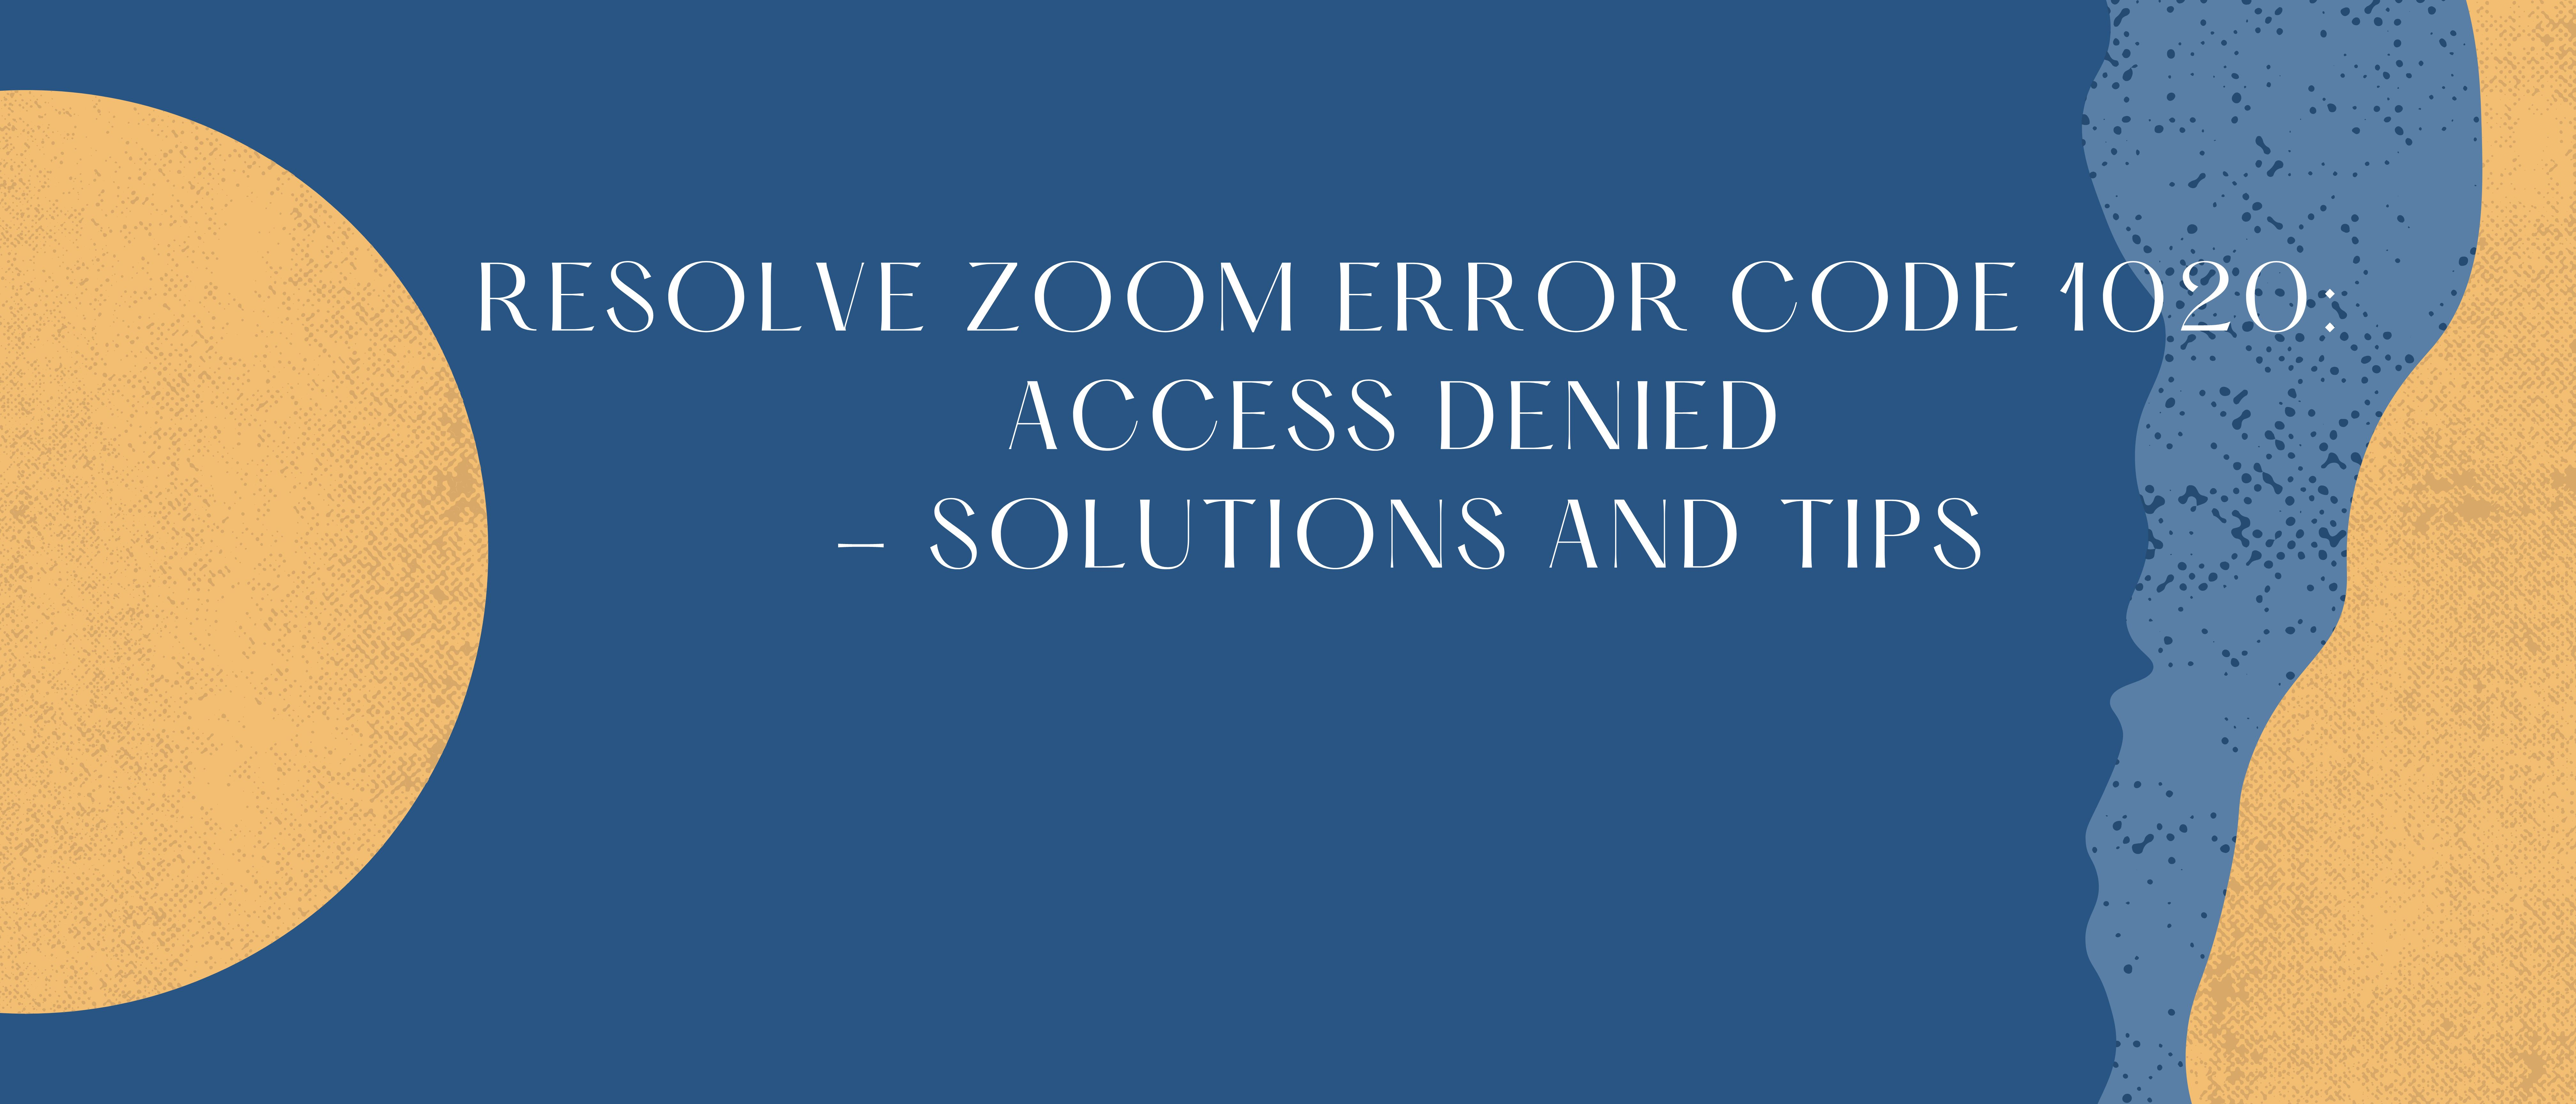 Resolve Zoom Error Code 1020: Access Denied - Solutions and Tips